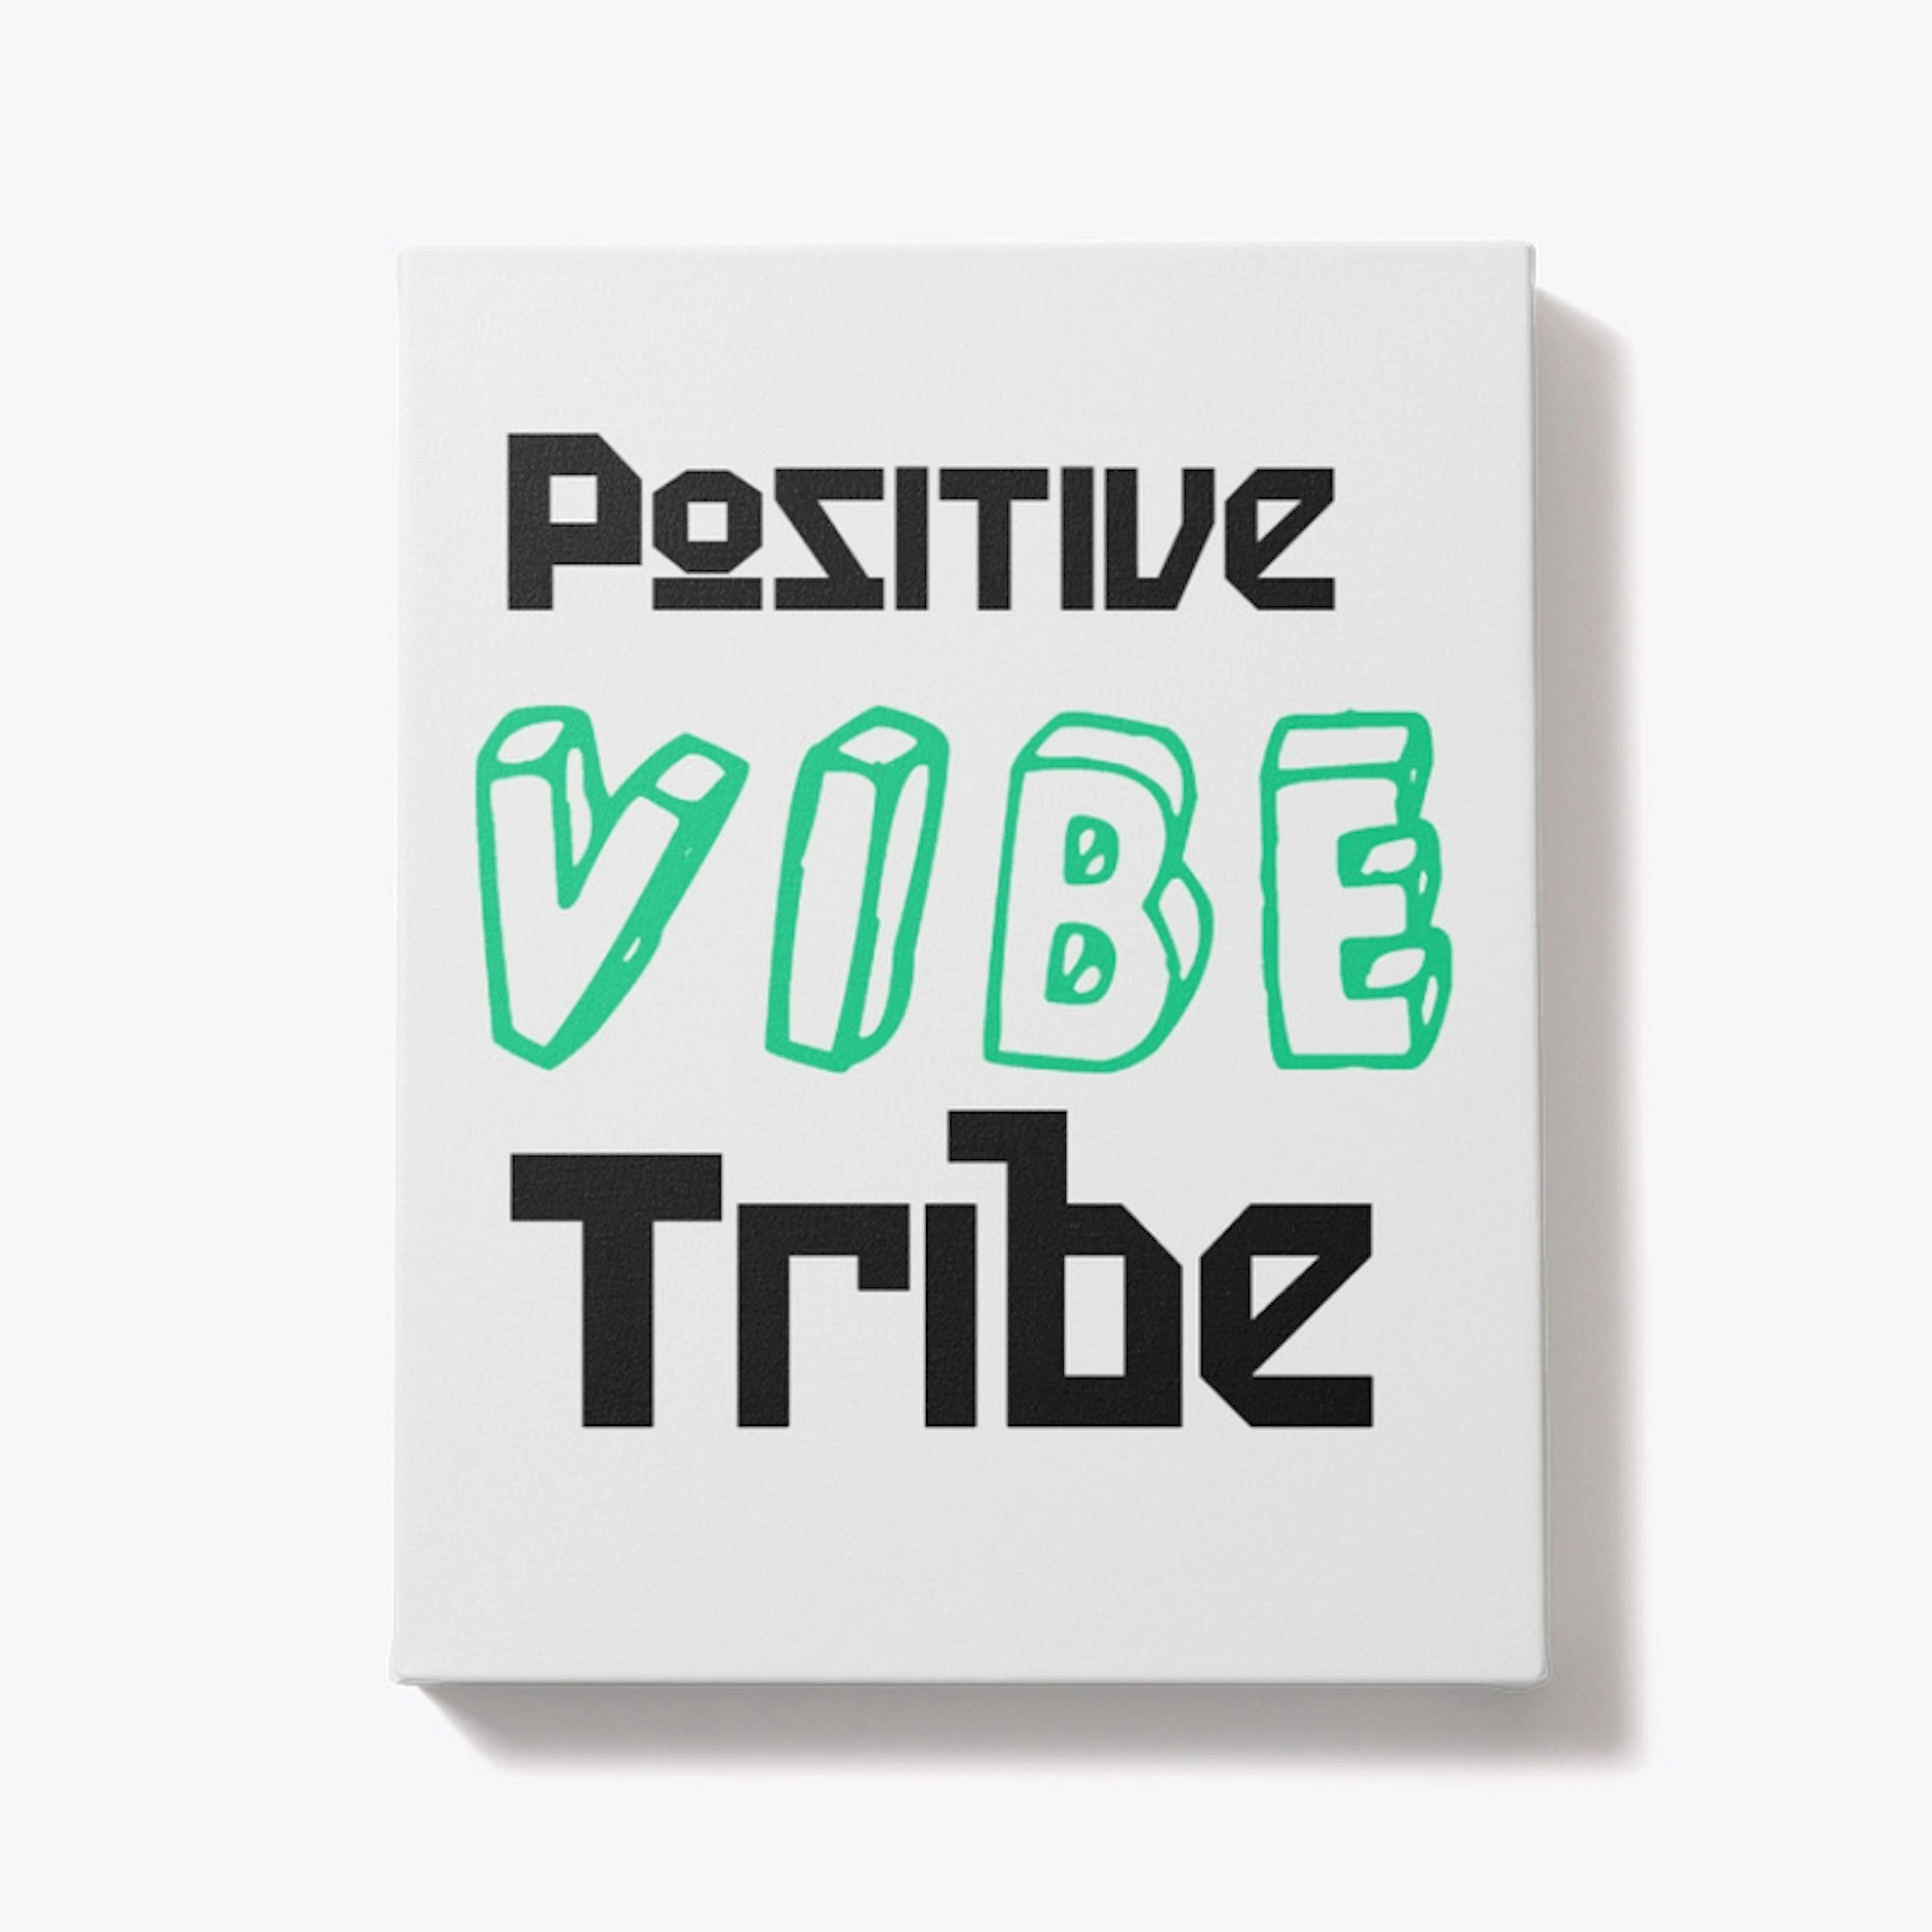 Positive Vibes Tribe